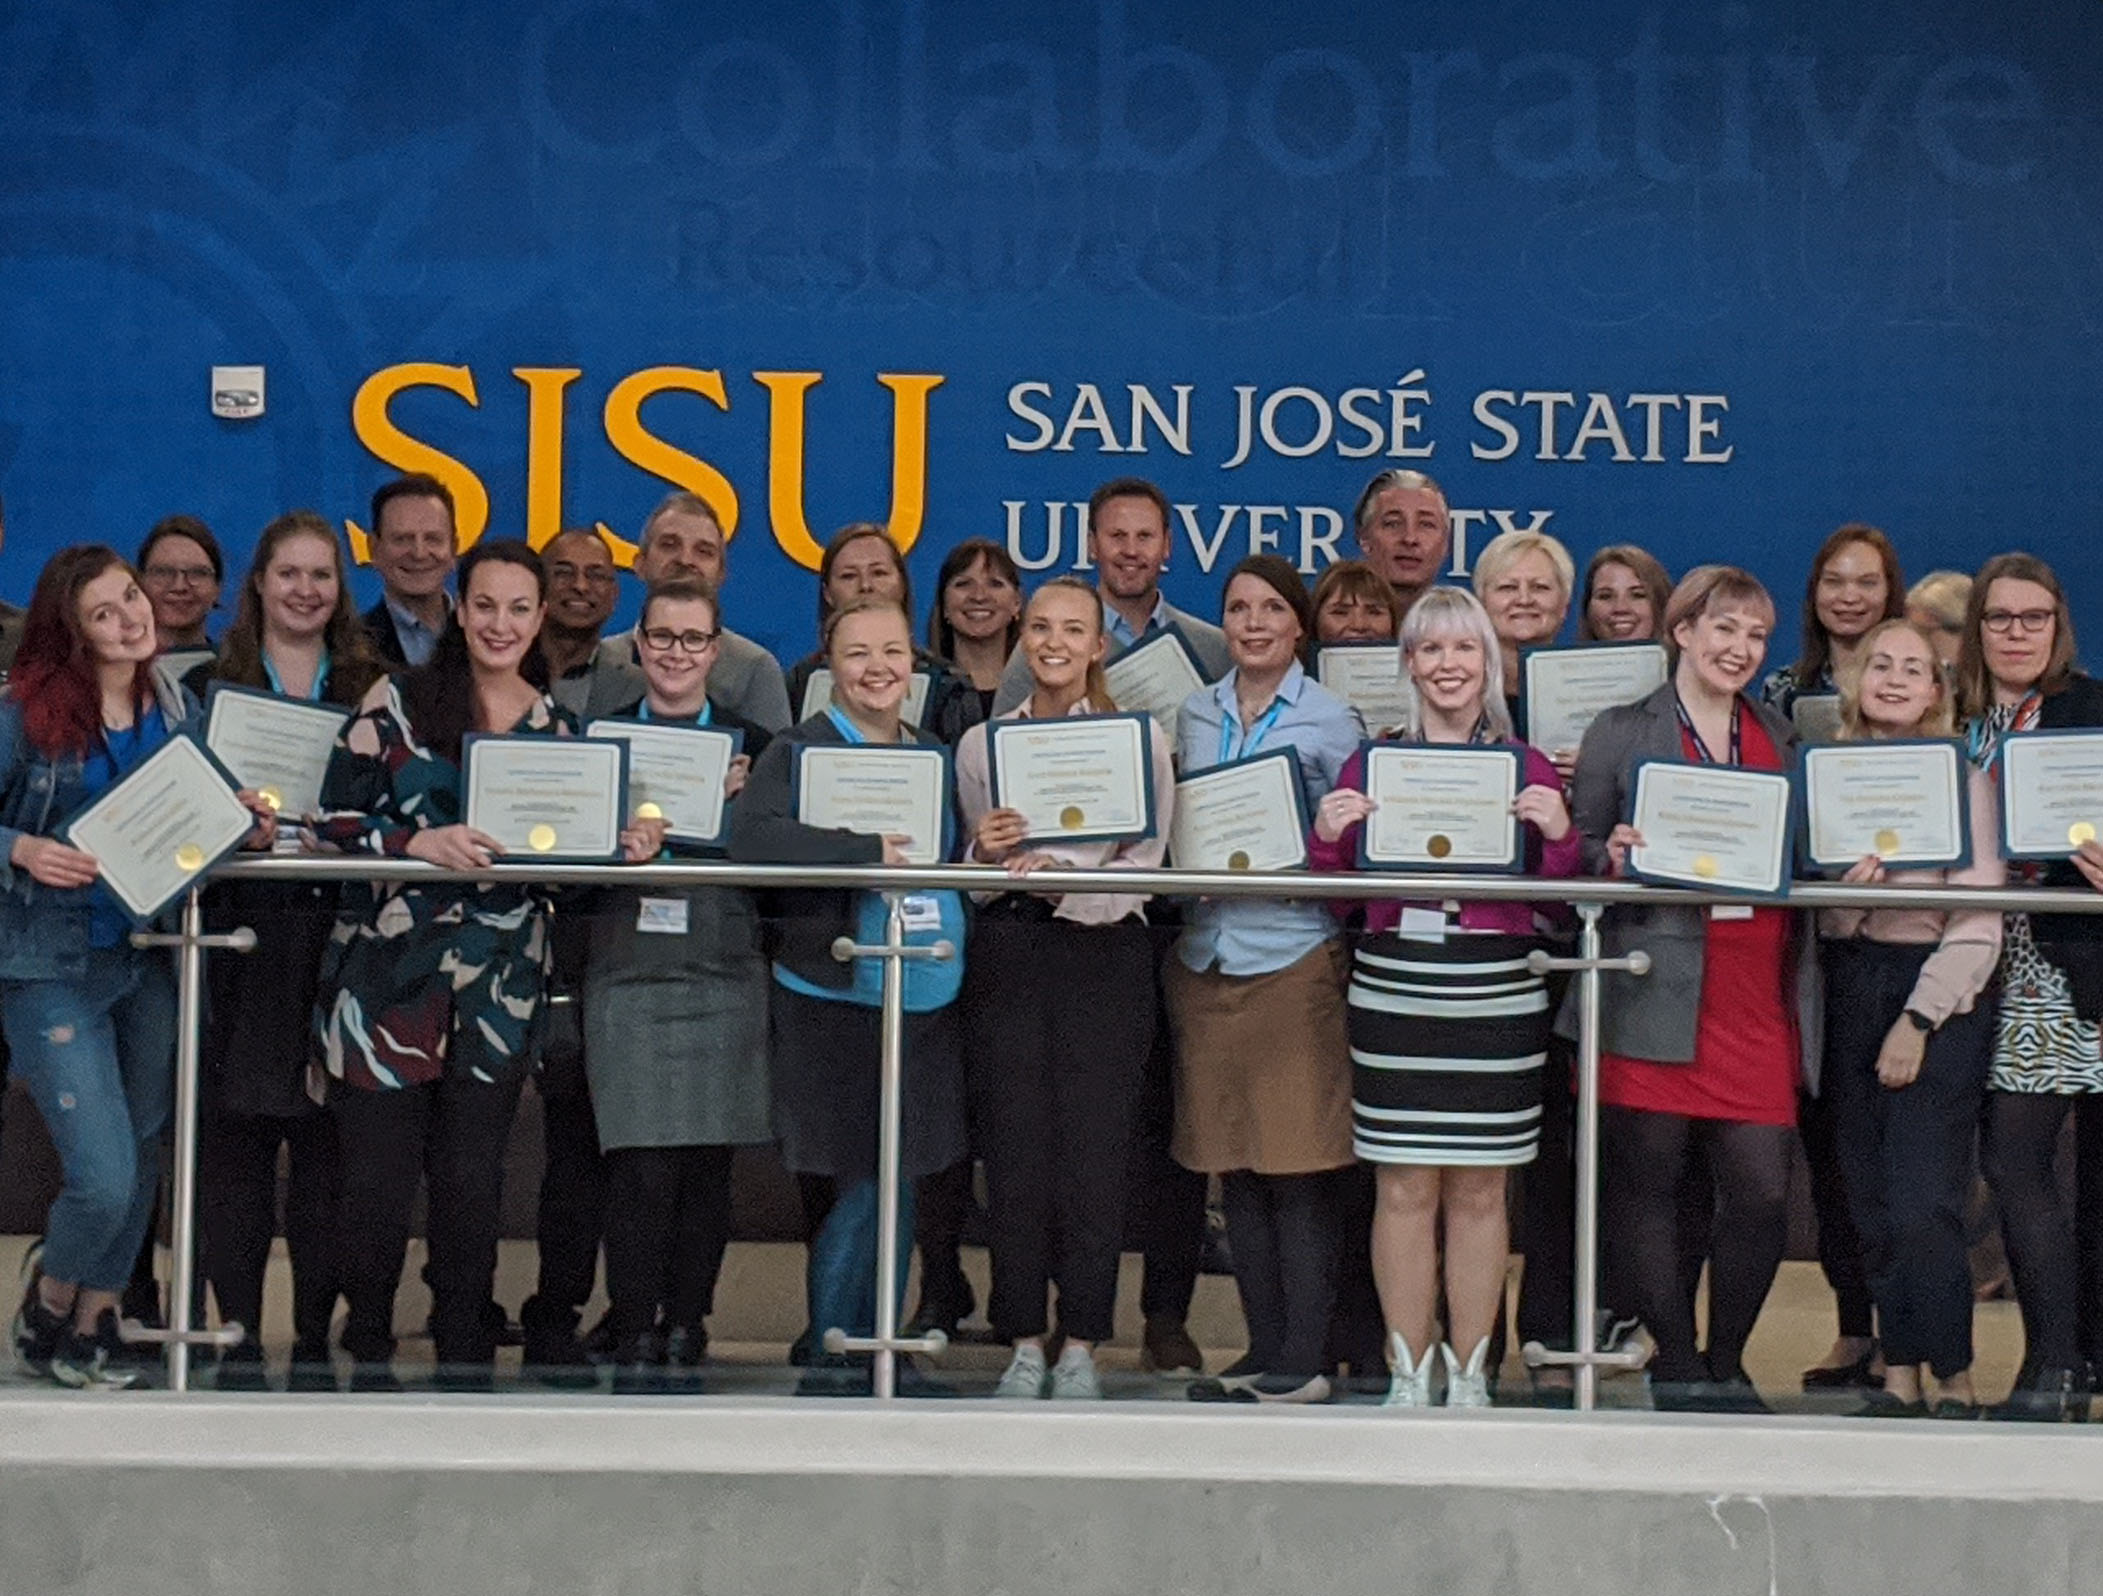 A group of people standing in front of a San José State University sign